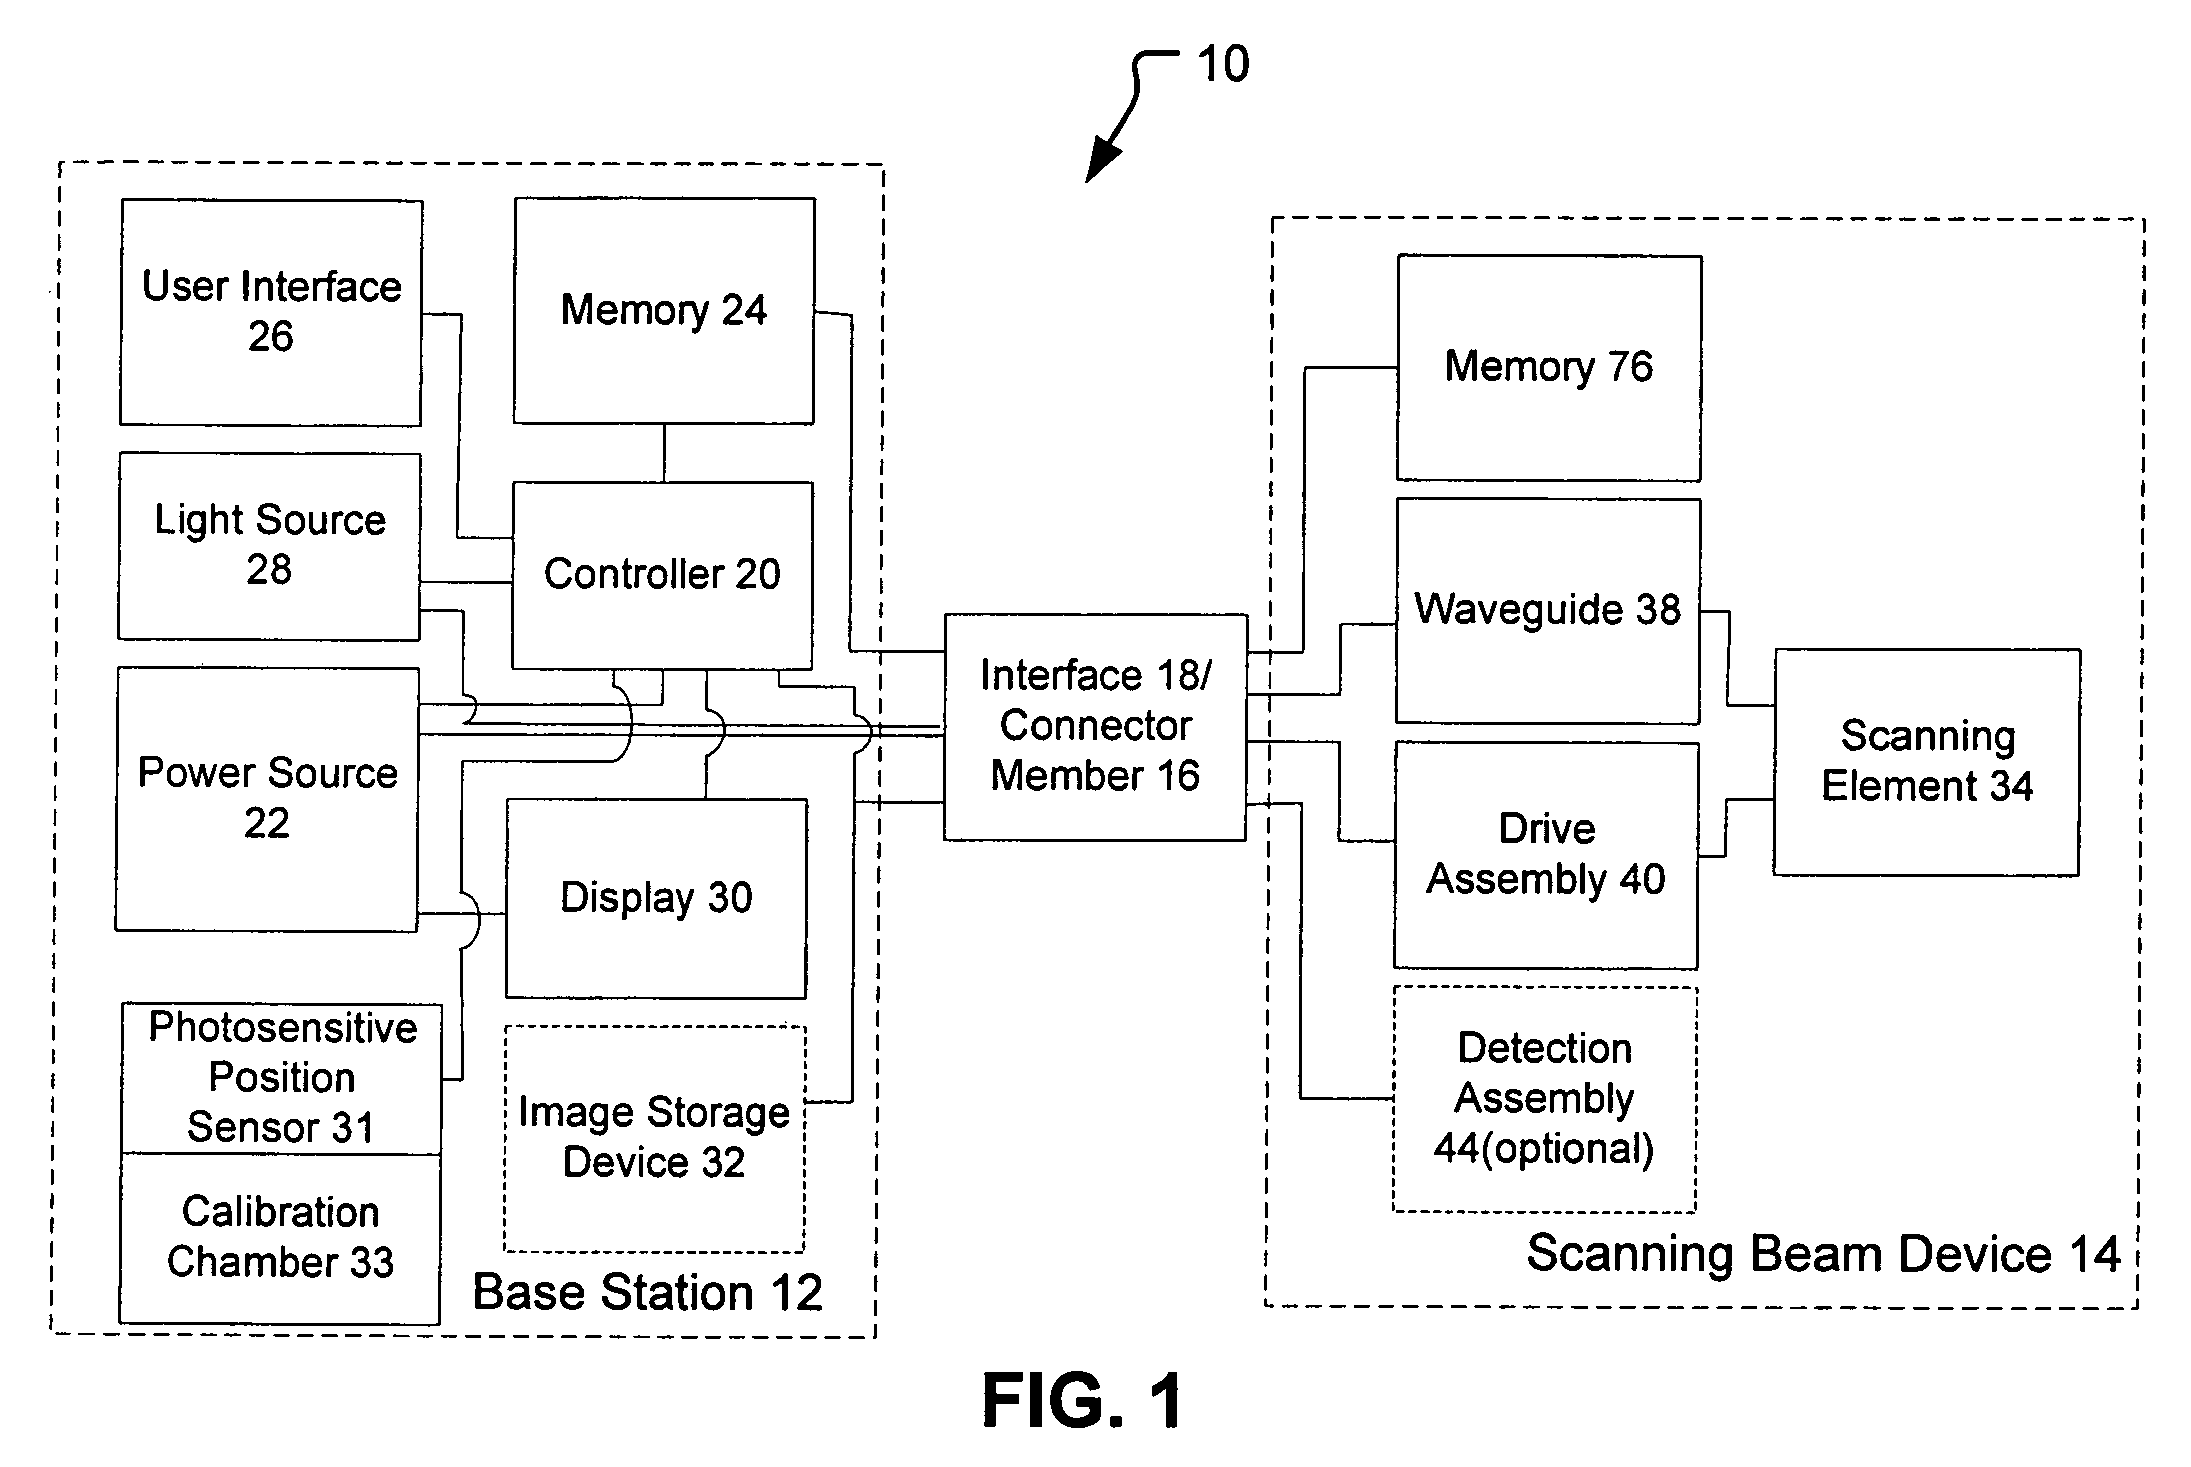 Scanning beam device with detector assembly